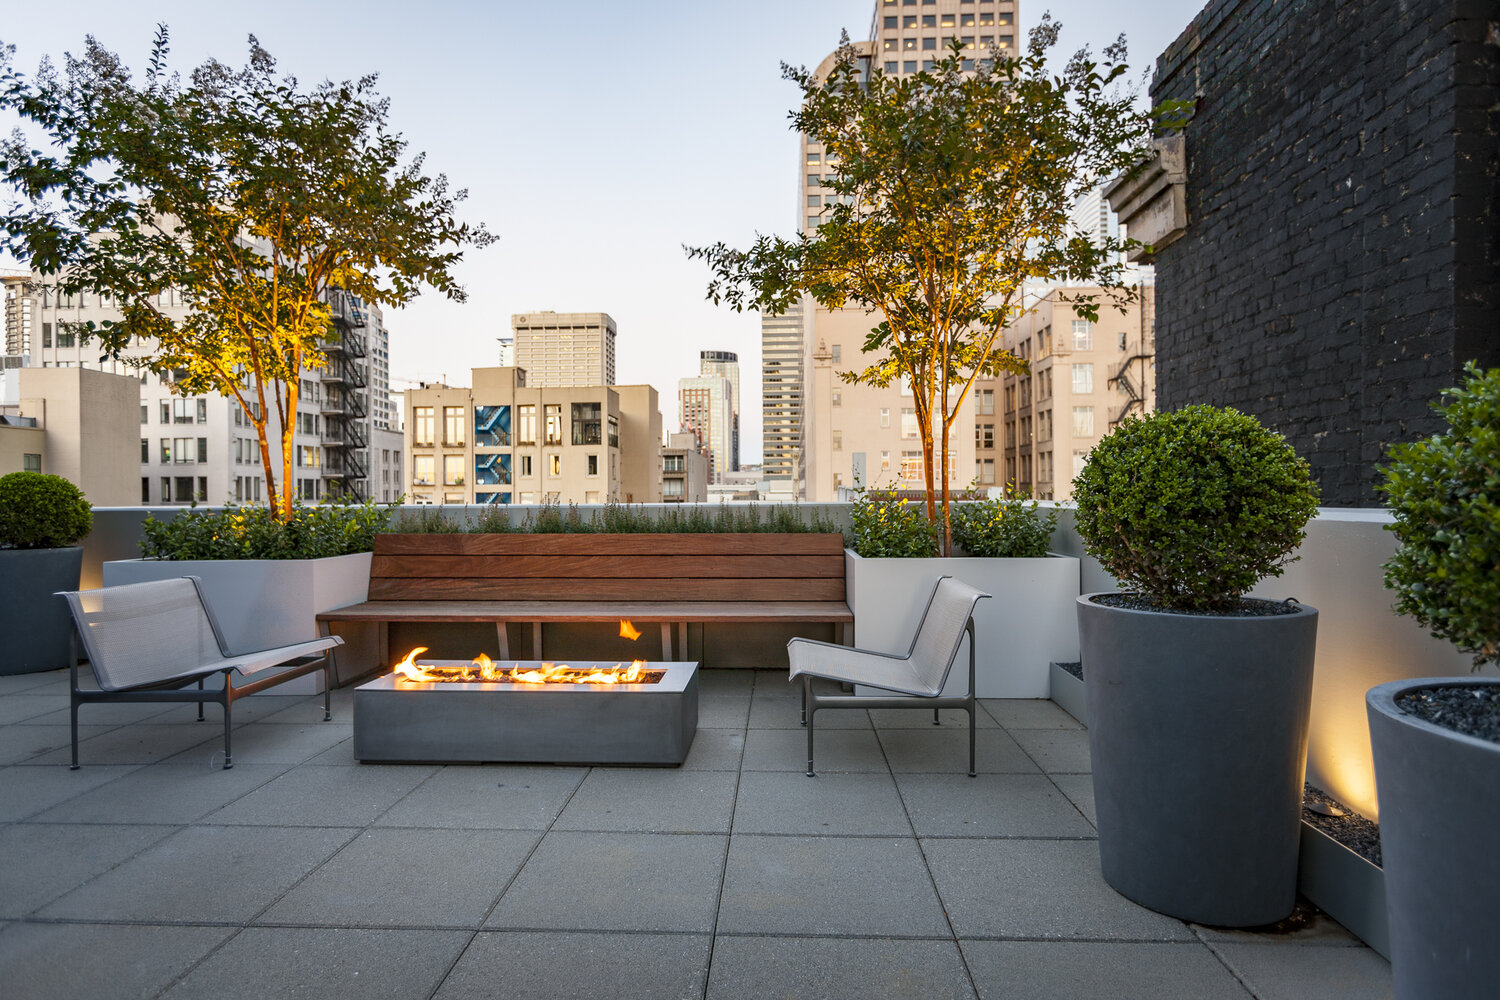 Project Highlight: Seattle Terrace | Design Ideas for the Built World